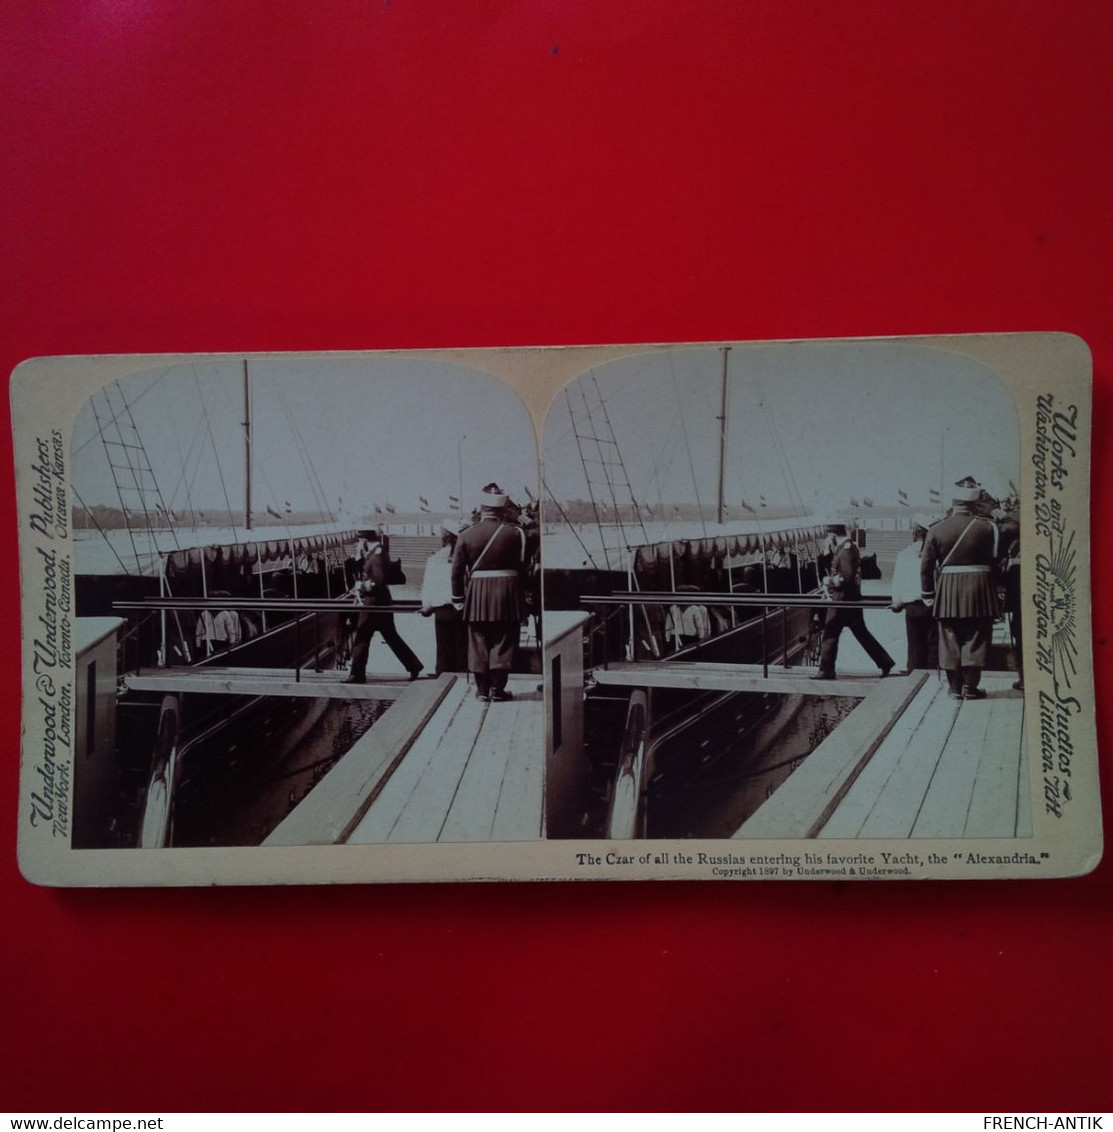 PHOTO STEREO ALEXANDRIA THE CZAR OF ALL THE RUSSIAS ENTERING HIS FAVORITE YACHT - Stereoscopic